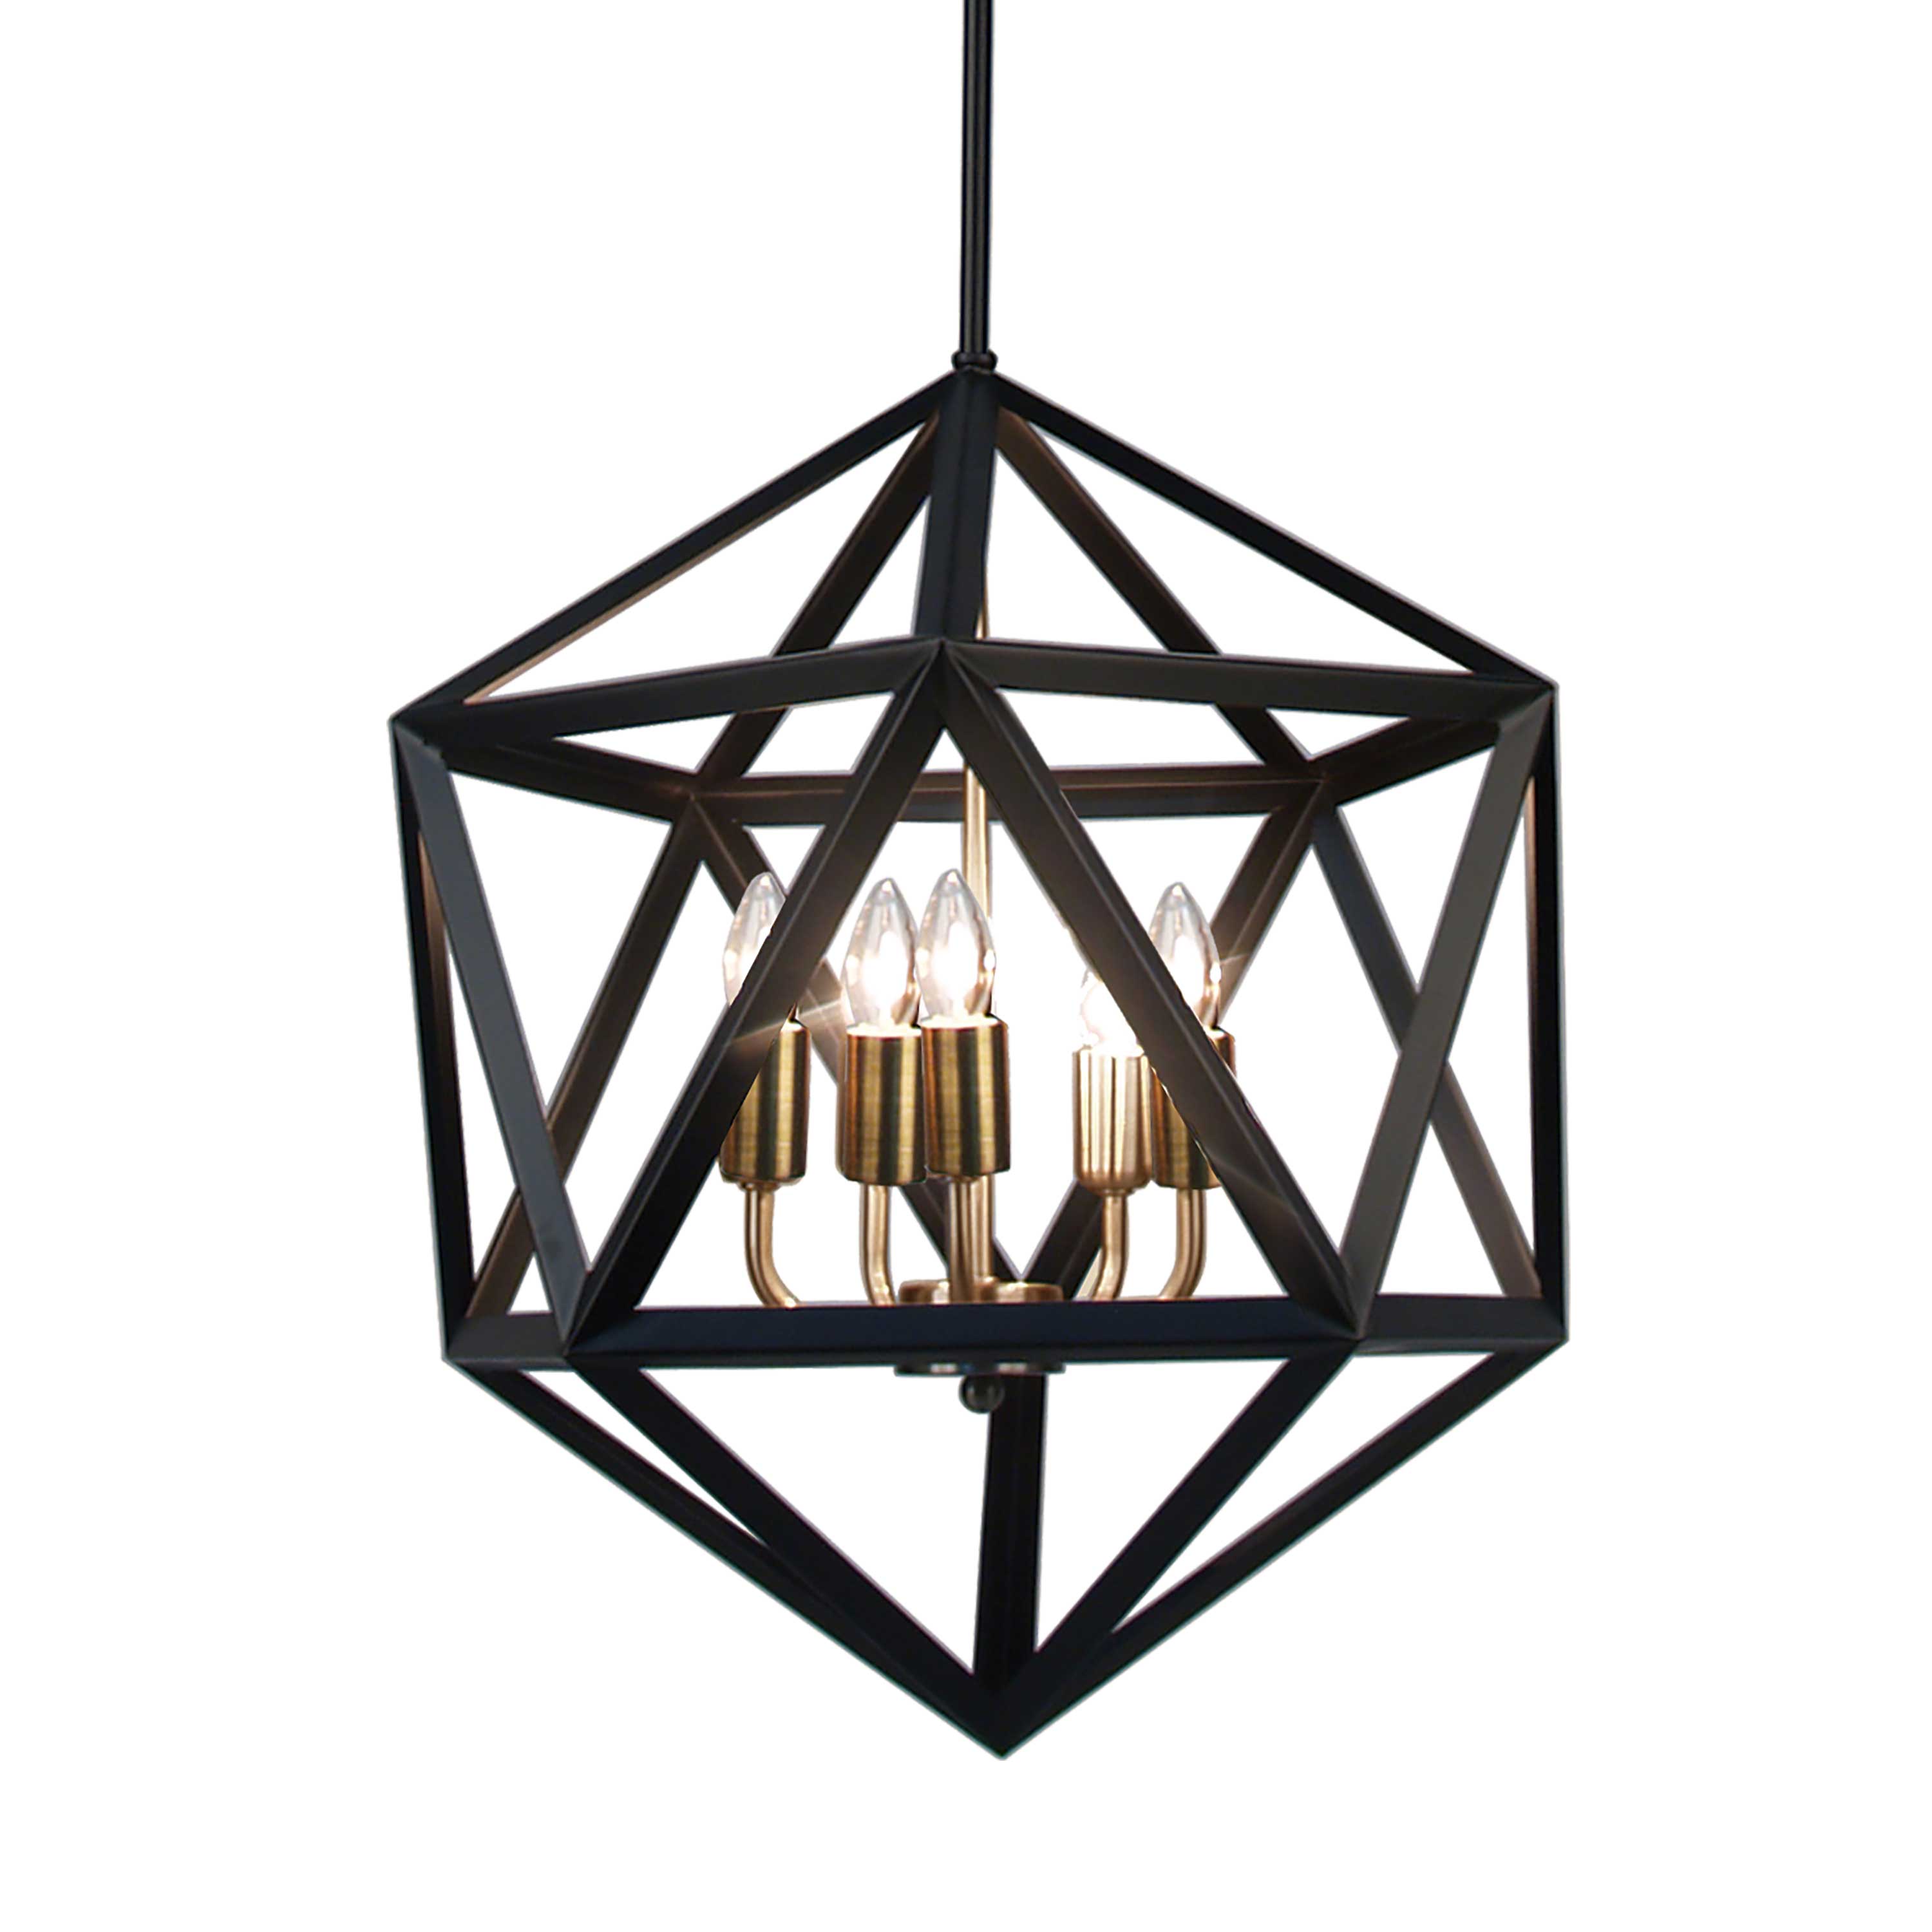 With its arresting design aesthetic, the Archello line of lighting brings a striking note to your home.  The caged construction contrasts a matte black metal frame exterior with a faceted, diamond-like geometry against the reflection of the lights on polished chrome or antique brass finish fixtures inside.  With a look that is inspired by classical designs yet neither entirely old nor new, Archello lighting will become a focal point of both contemporary and traditional design schemes and will create an especially compelling note in a minimalist setting. Available as a flush mount or chandelier.